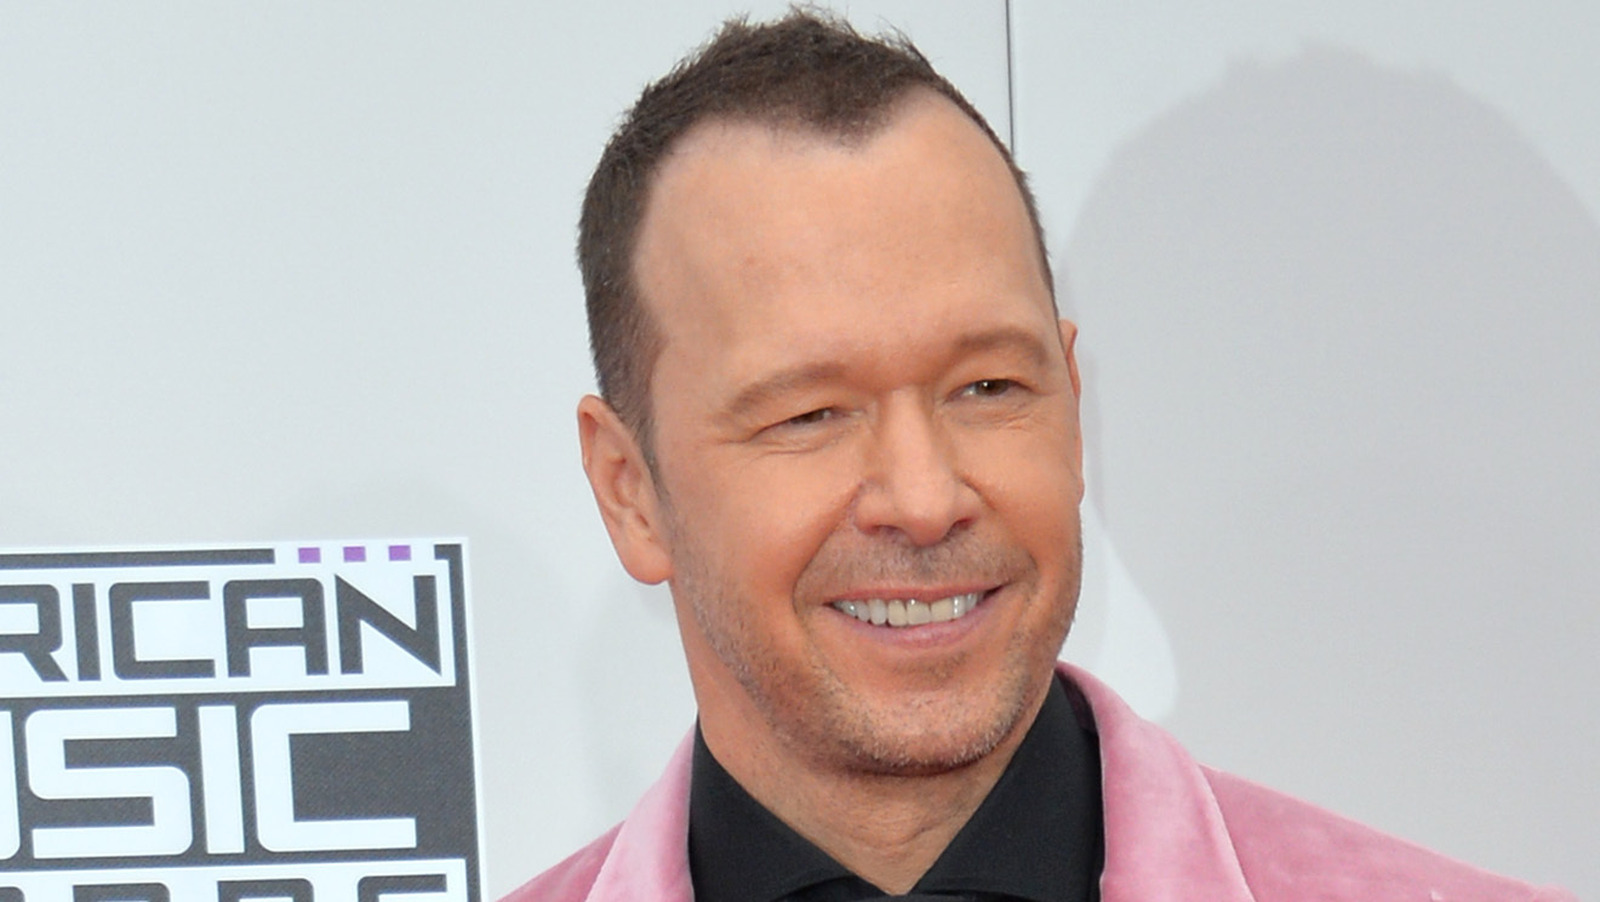 Why Did Donnie Wahlberg And His Wife Divorce?